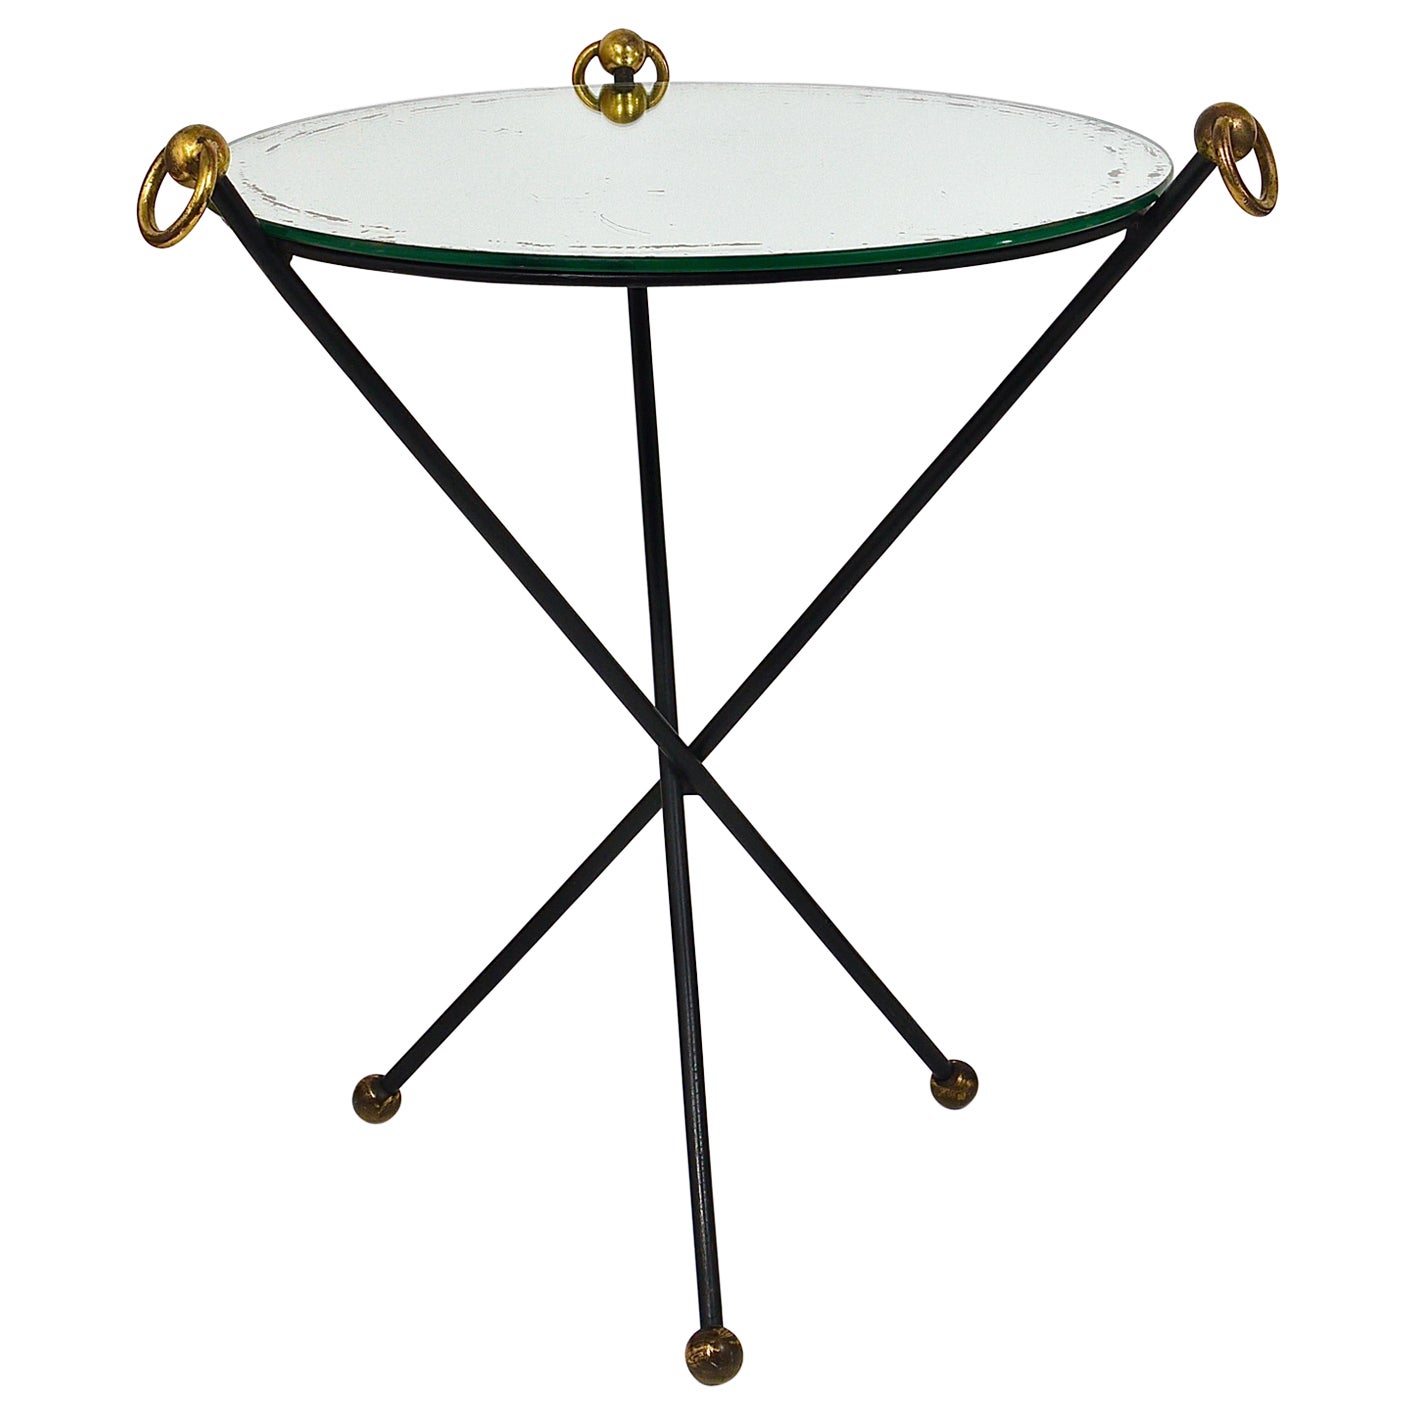 French Mid-Century Modern Mirror Side Table, Jacques Adnet Style, Brass, 1950s